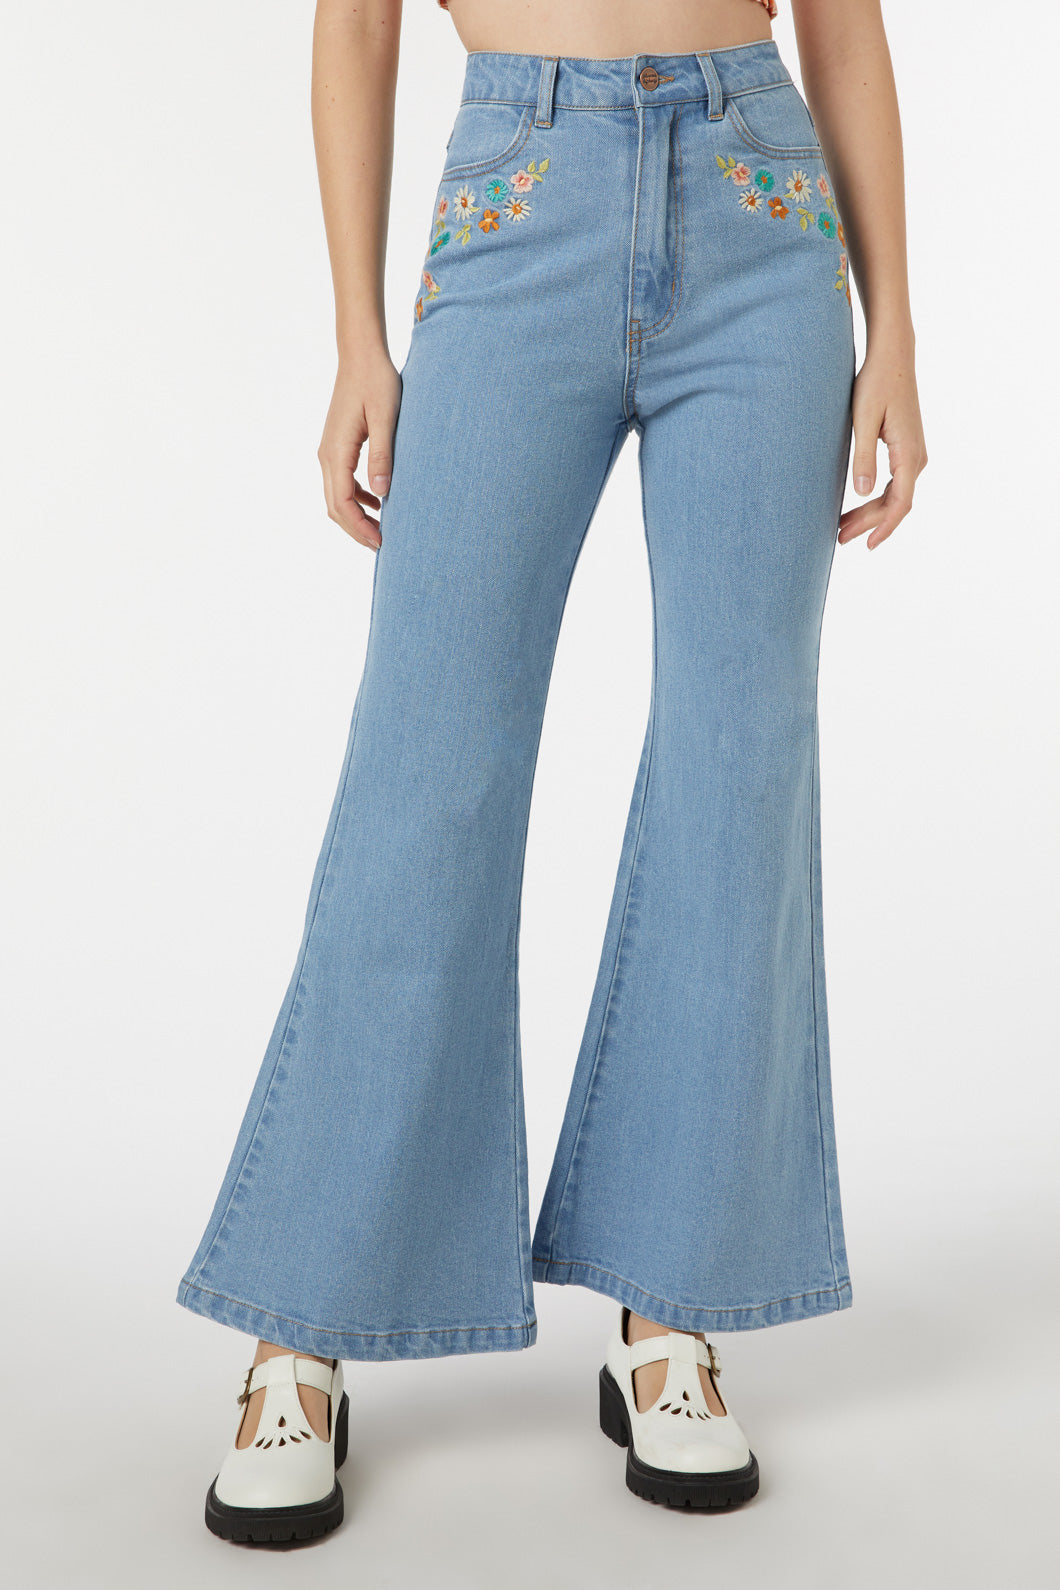 Wendy Flare Embroidered Jean Princess Highway